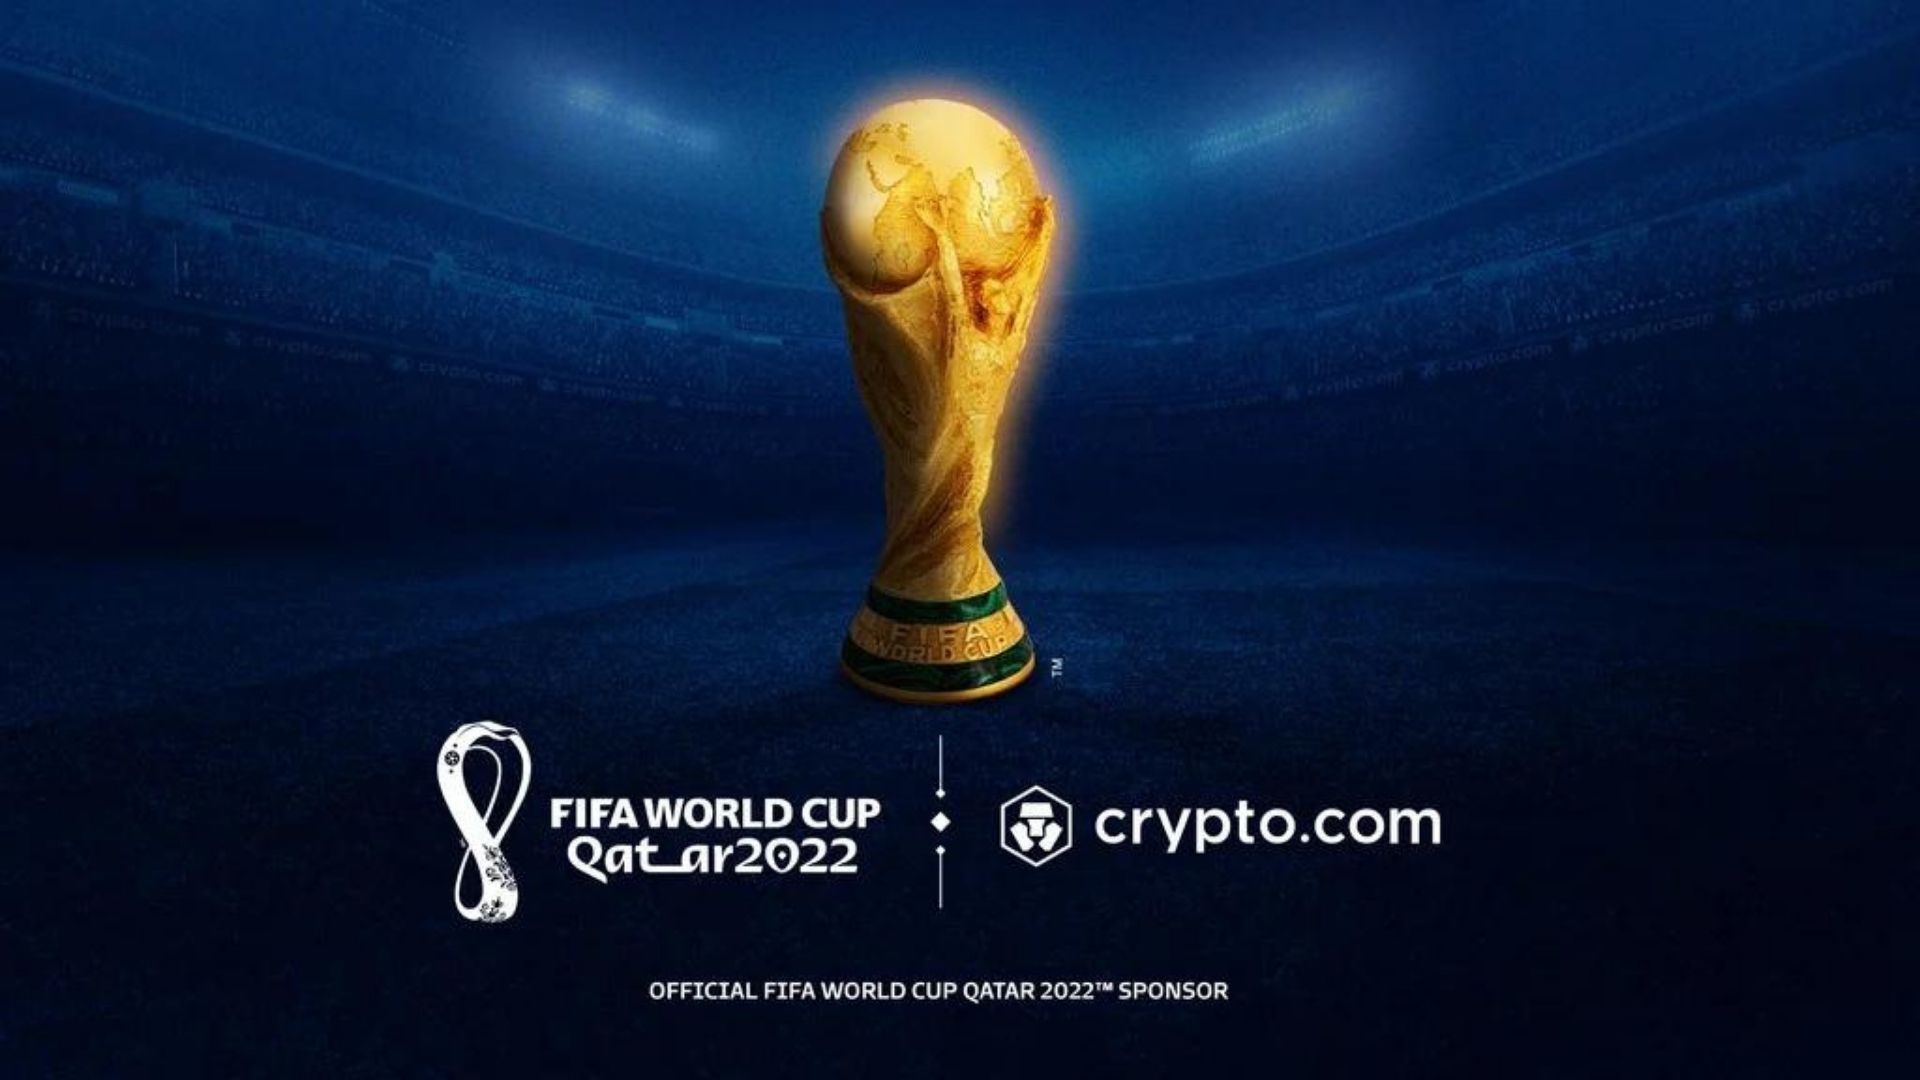 Crypto is the official sponsor of the FIFA World Cup Qatar 2022